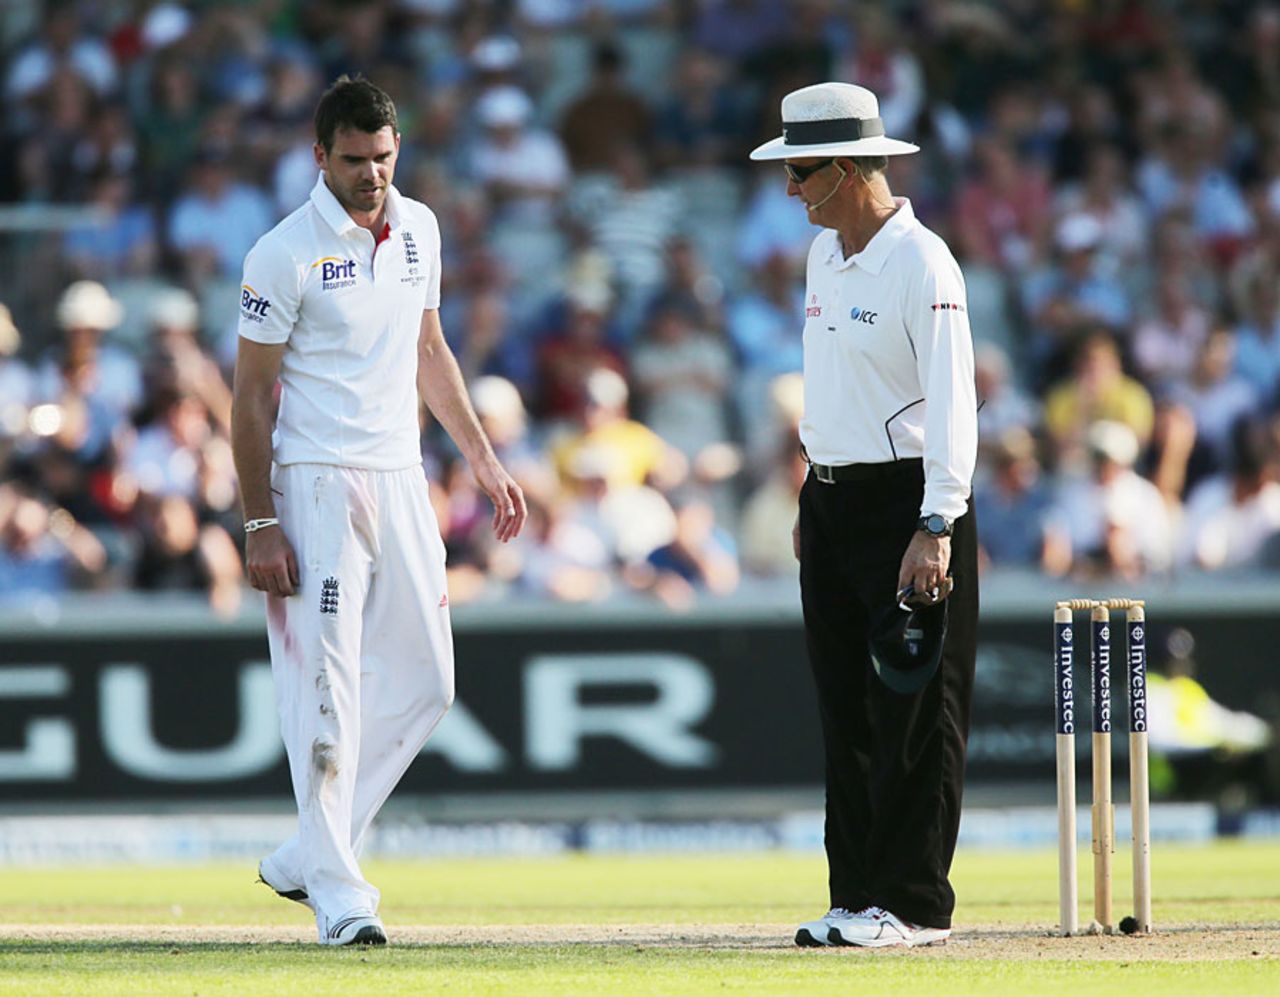 It was a frustrating day for James Anderson on his homeground, England v Australia, 3rd Investec Test, Old Trafford, 1st day, August 1, 2013